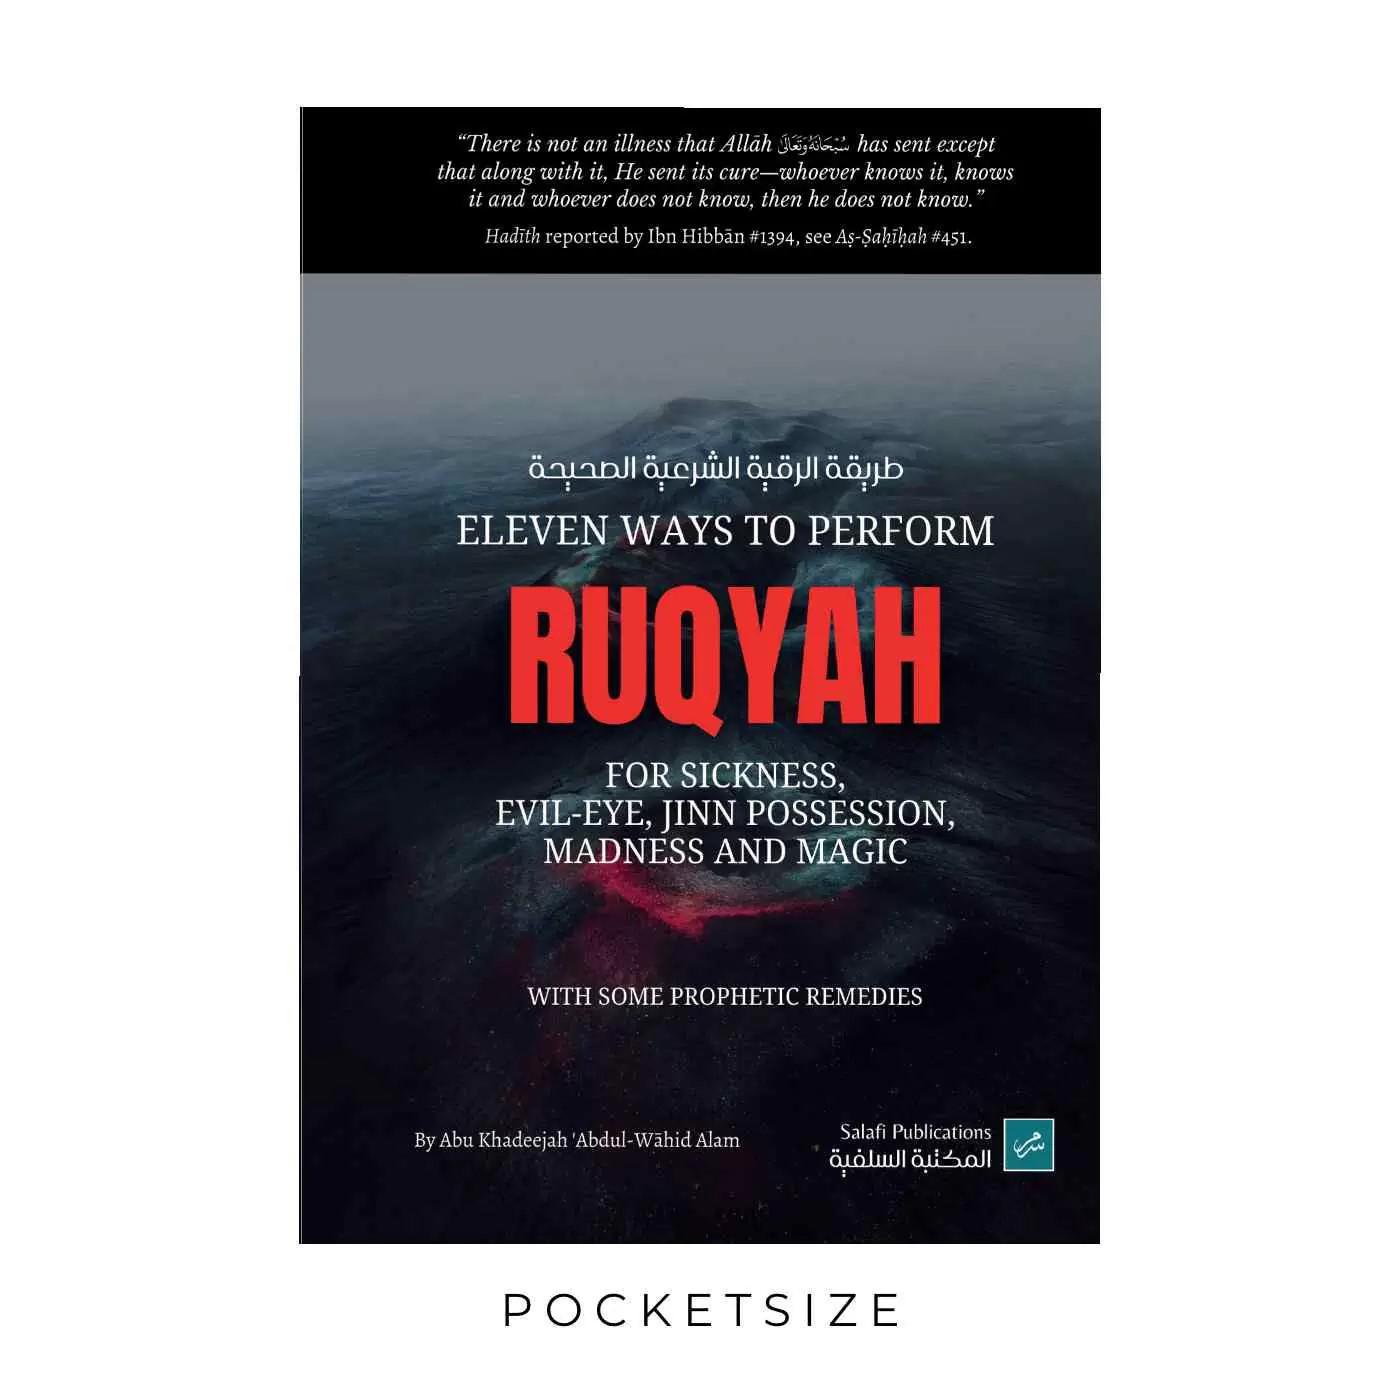 Eleven Ways To Perform Ruqyah For Sickness, Evil-Eye, Jinn Possession, Madness And Magic (Pocket Size)